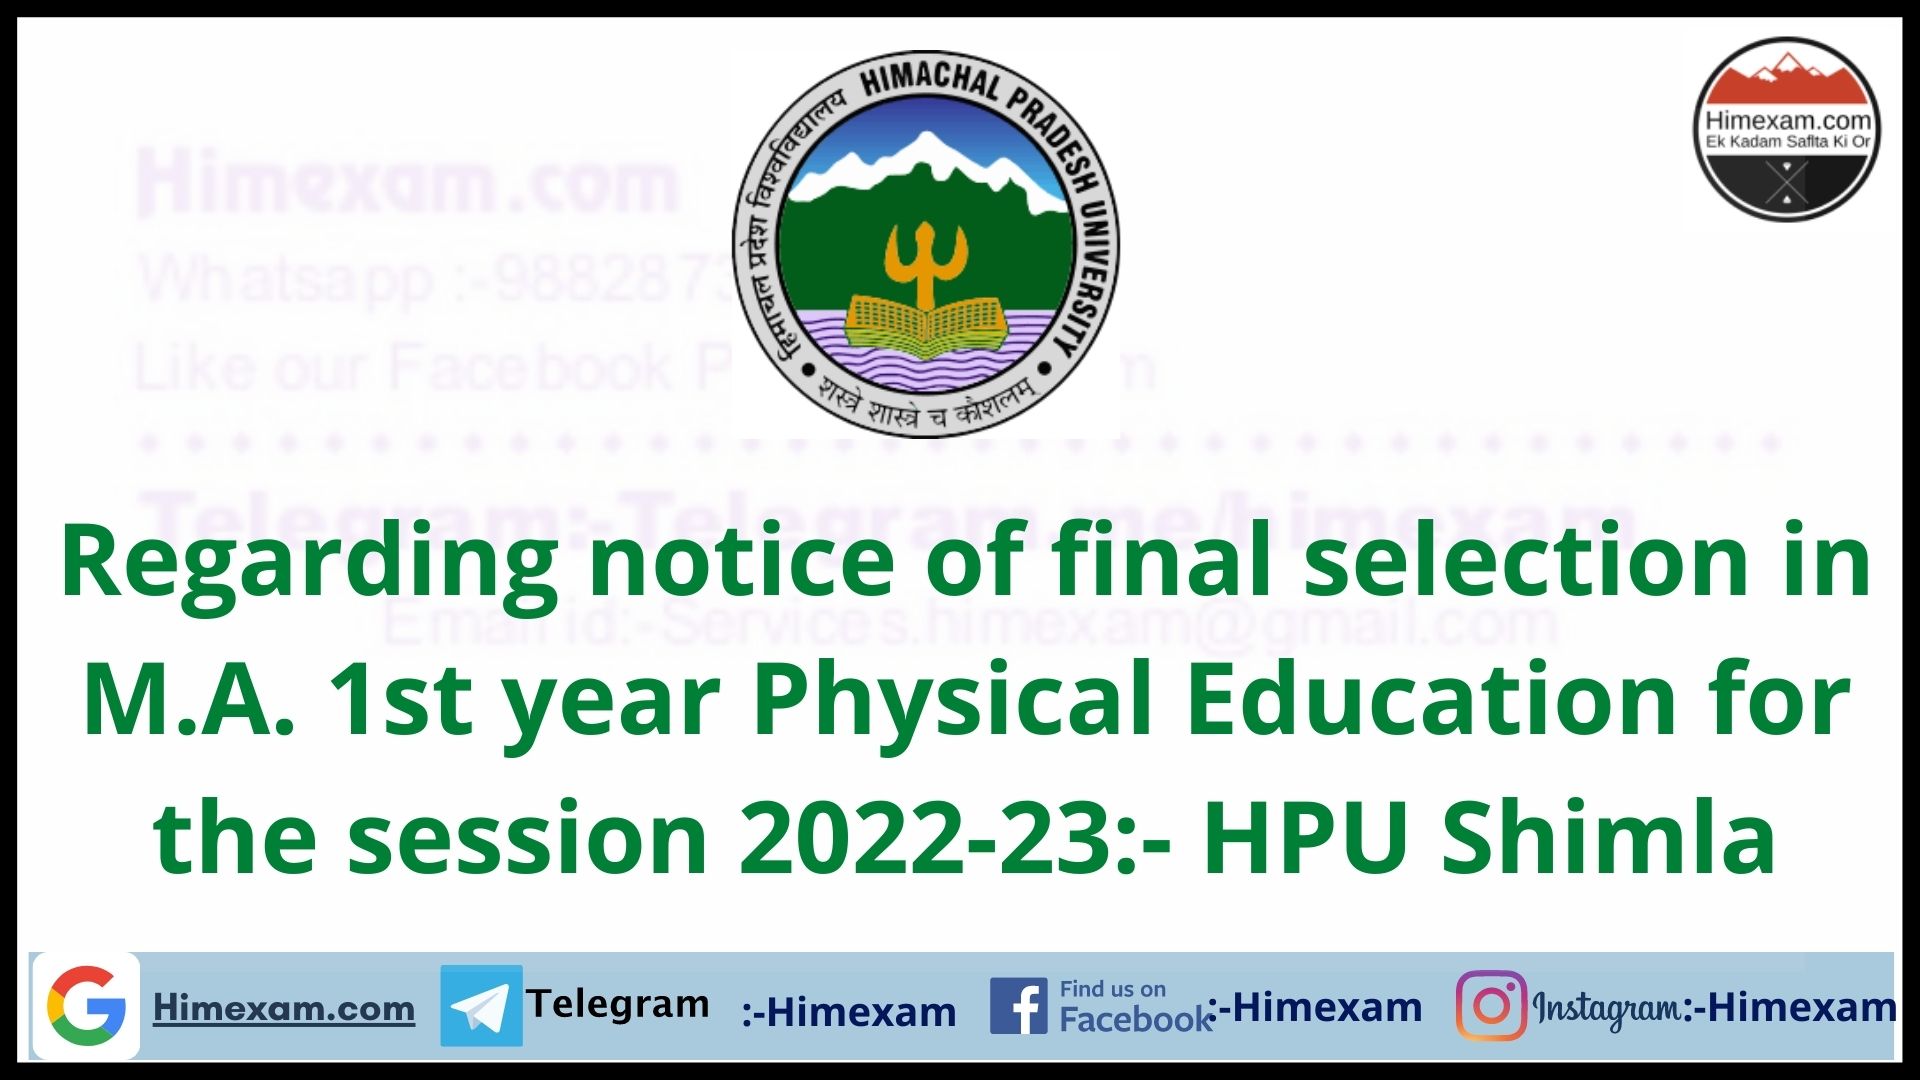 Regarding notice of final selection in M.A. 1st year Physical Education for the session 2022-23:- HPU Shimla